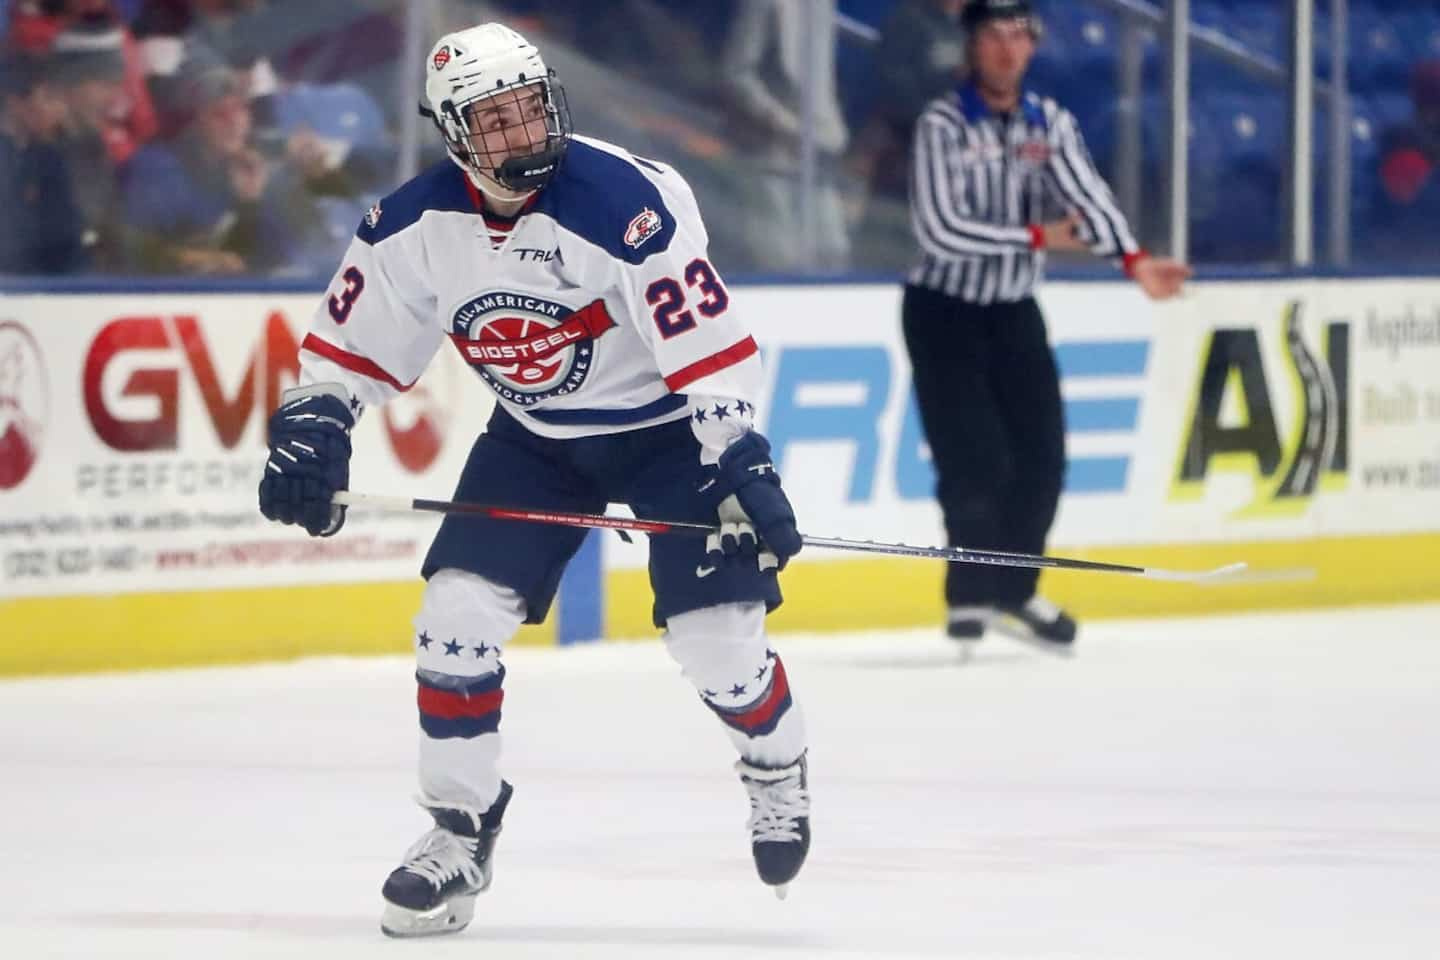 Montreal Canadiens: Lane Hutson cut by the American team